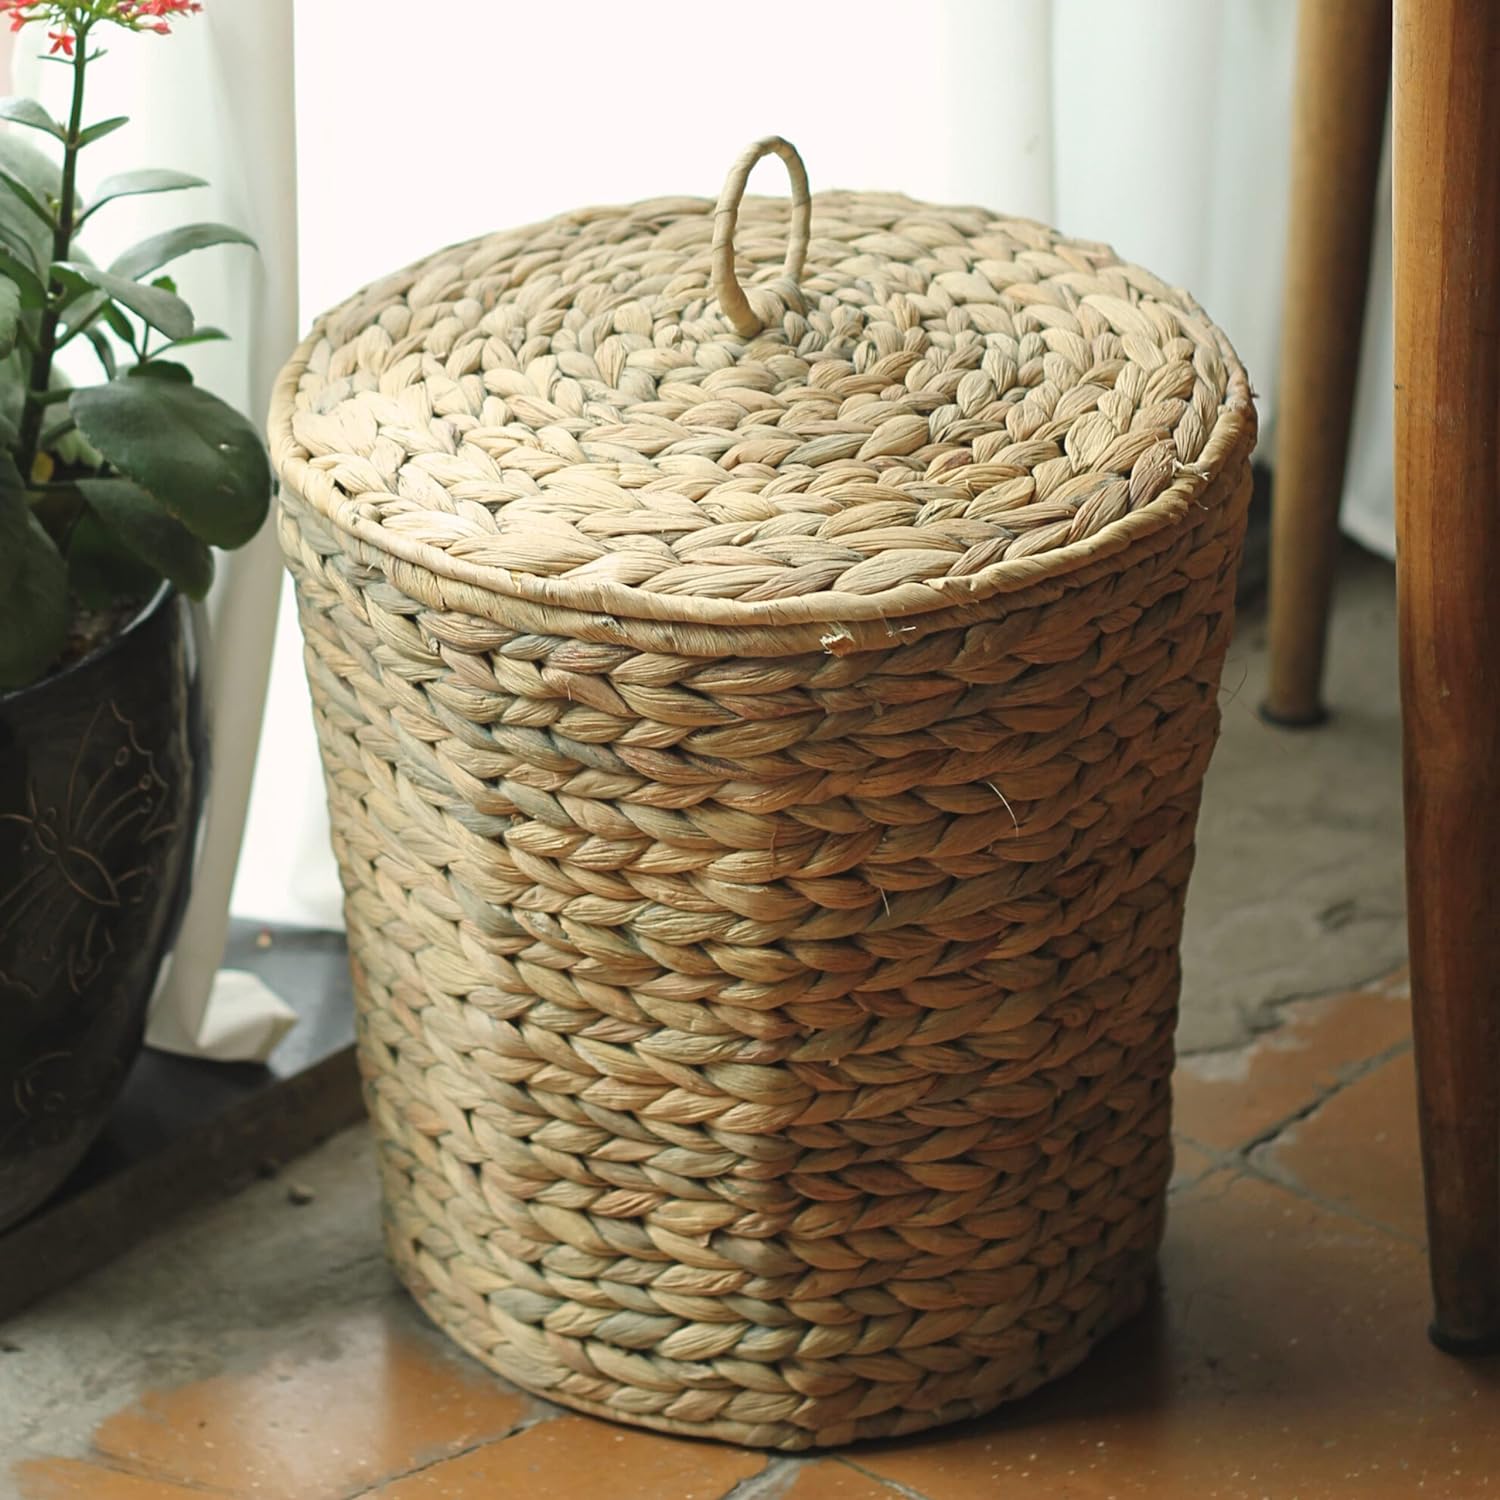 https://bigbigmart.com/wp-content/uploads/2023/10/KOLWOVEN-Wicker-Trash-Can-with-Lid-in-Bedroom-Bathroom-3-Gallon-Small-Trash-Can-in-Office-Boho-Woven-Wicker-Waste-Basket-Office-Garbage-Cans-for-Under-Desk-with-Plastic-Insert.0.jpg